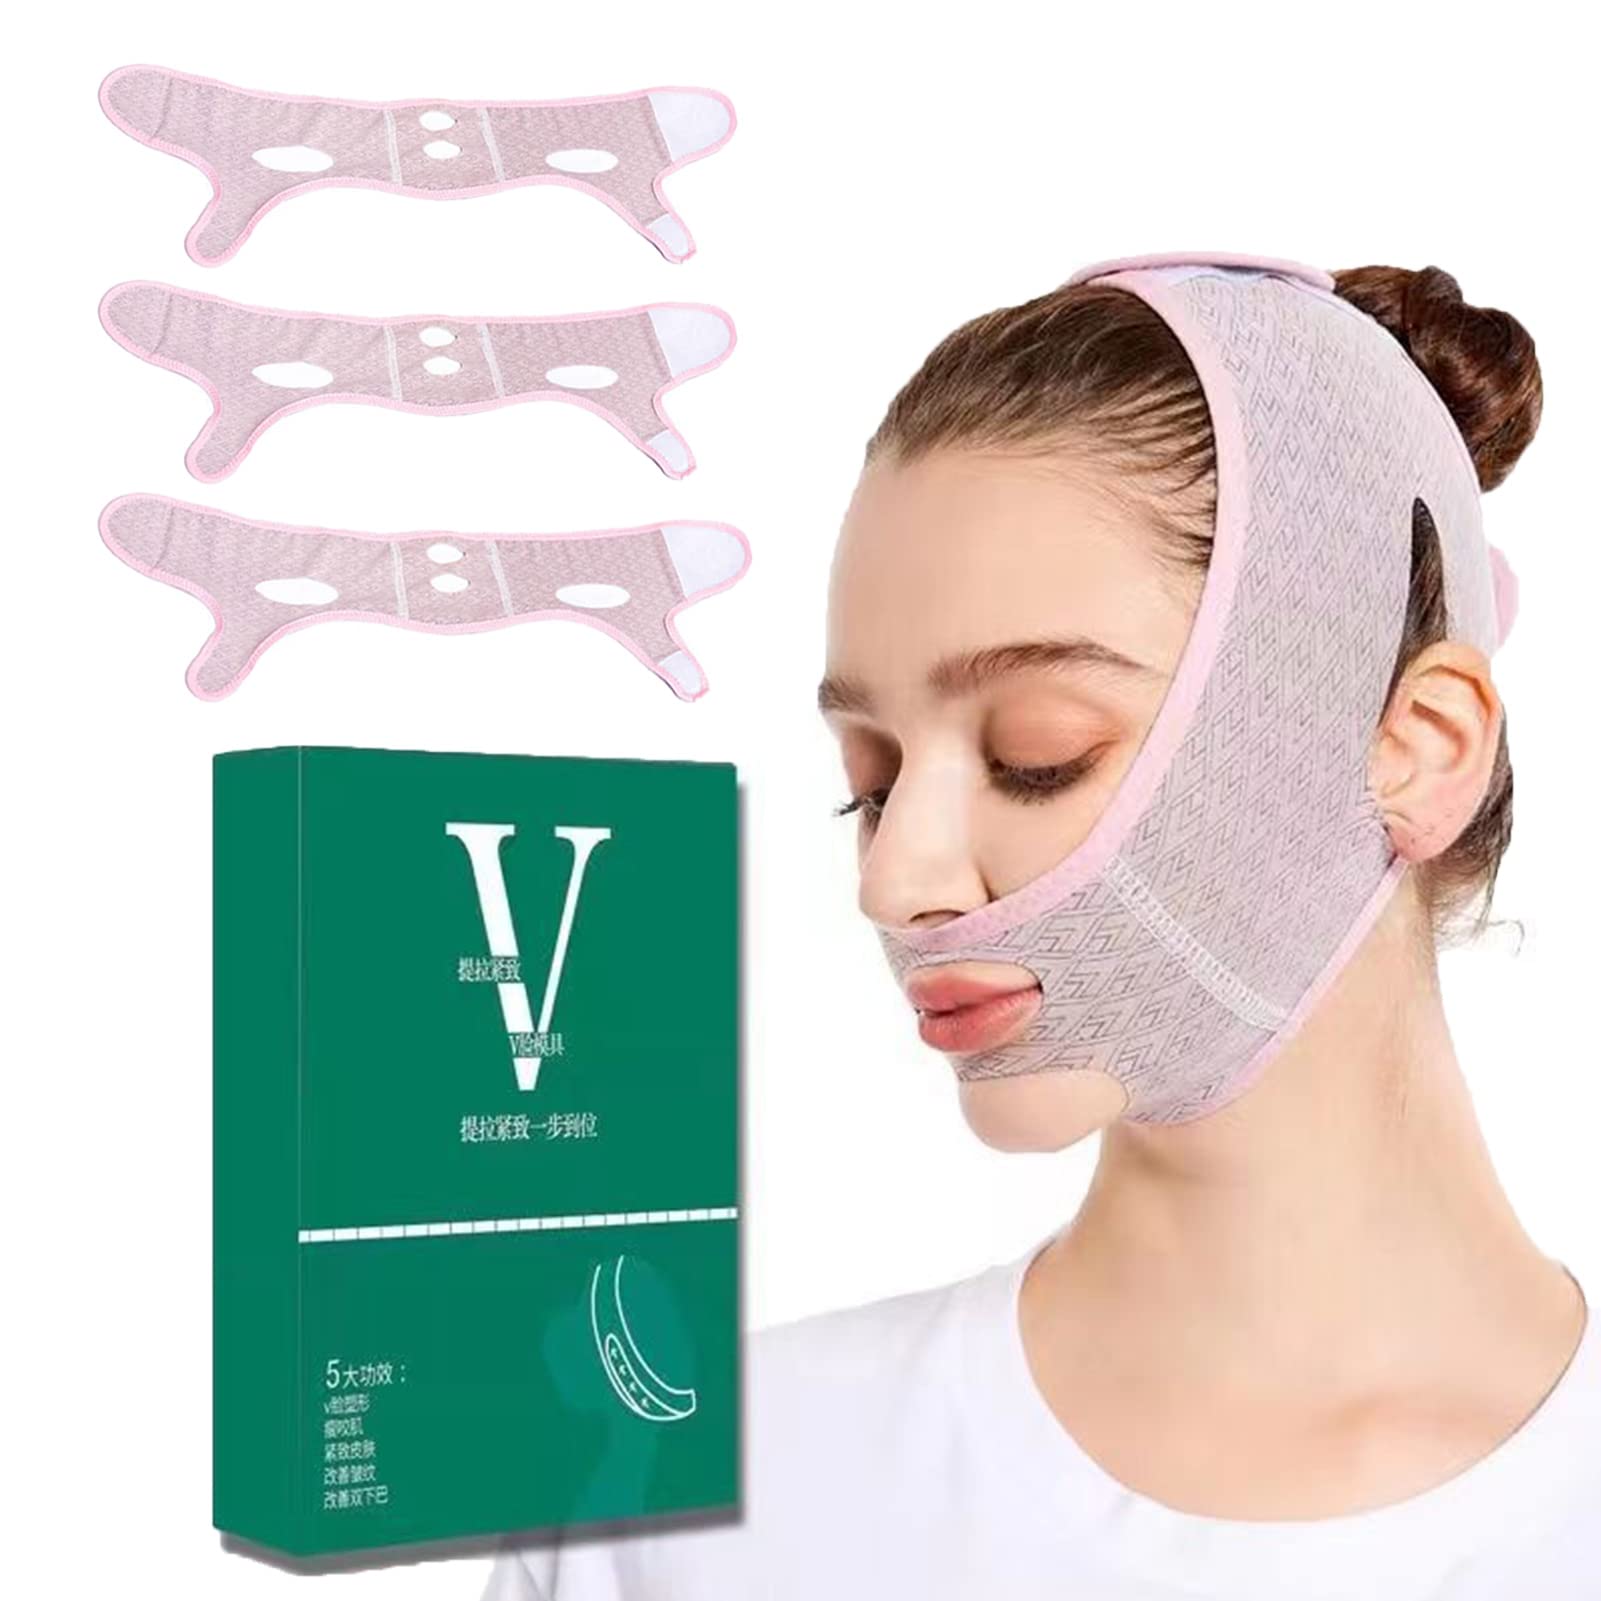 Buy Getmecraft V Line Lifting Face Mask, Double Chin Reducer Mask